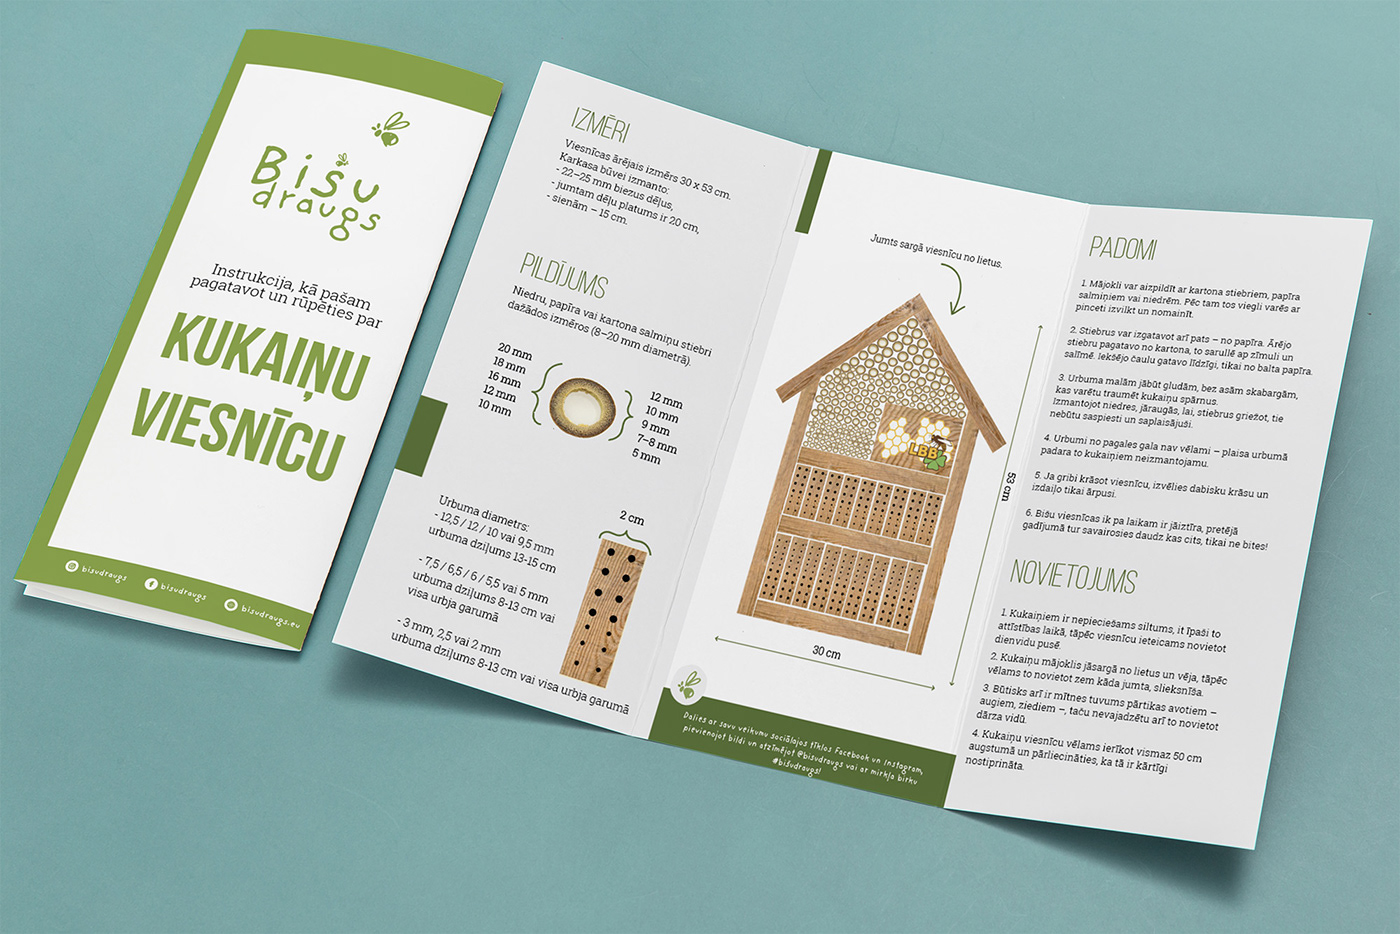 Booklet about bee hotel and instruction